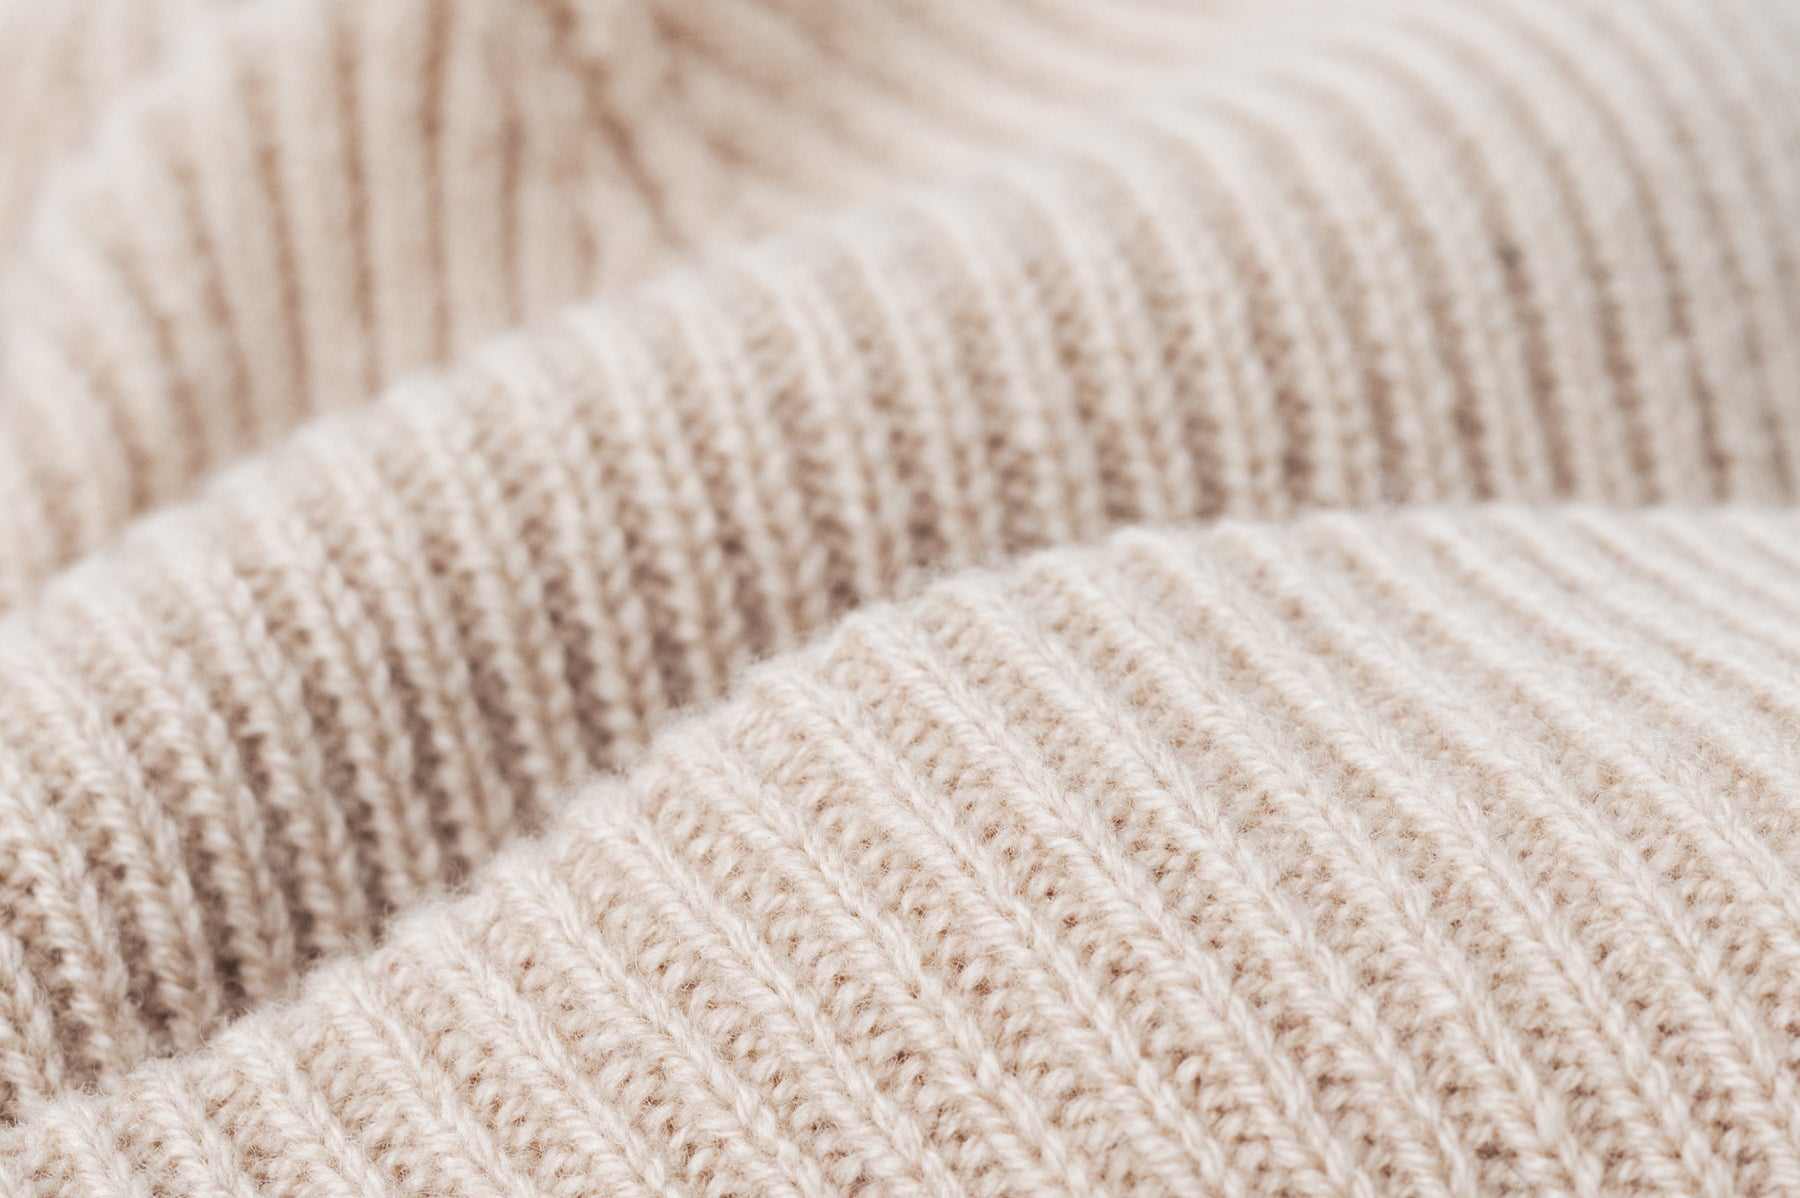 Introducing our Cashmere/Merino Beanie